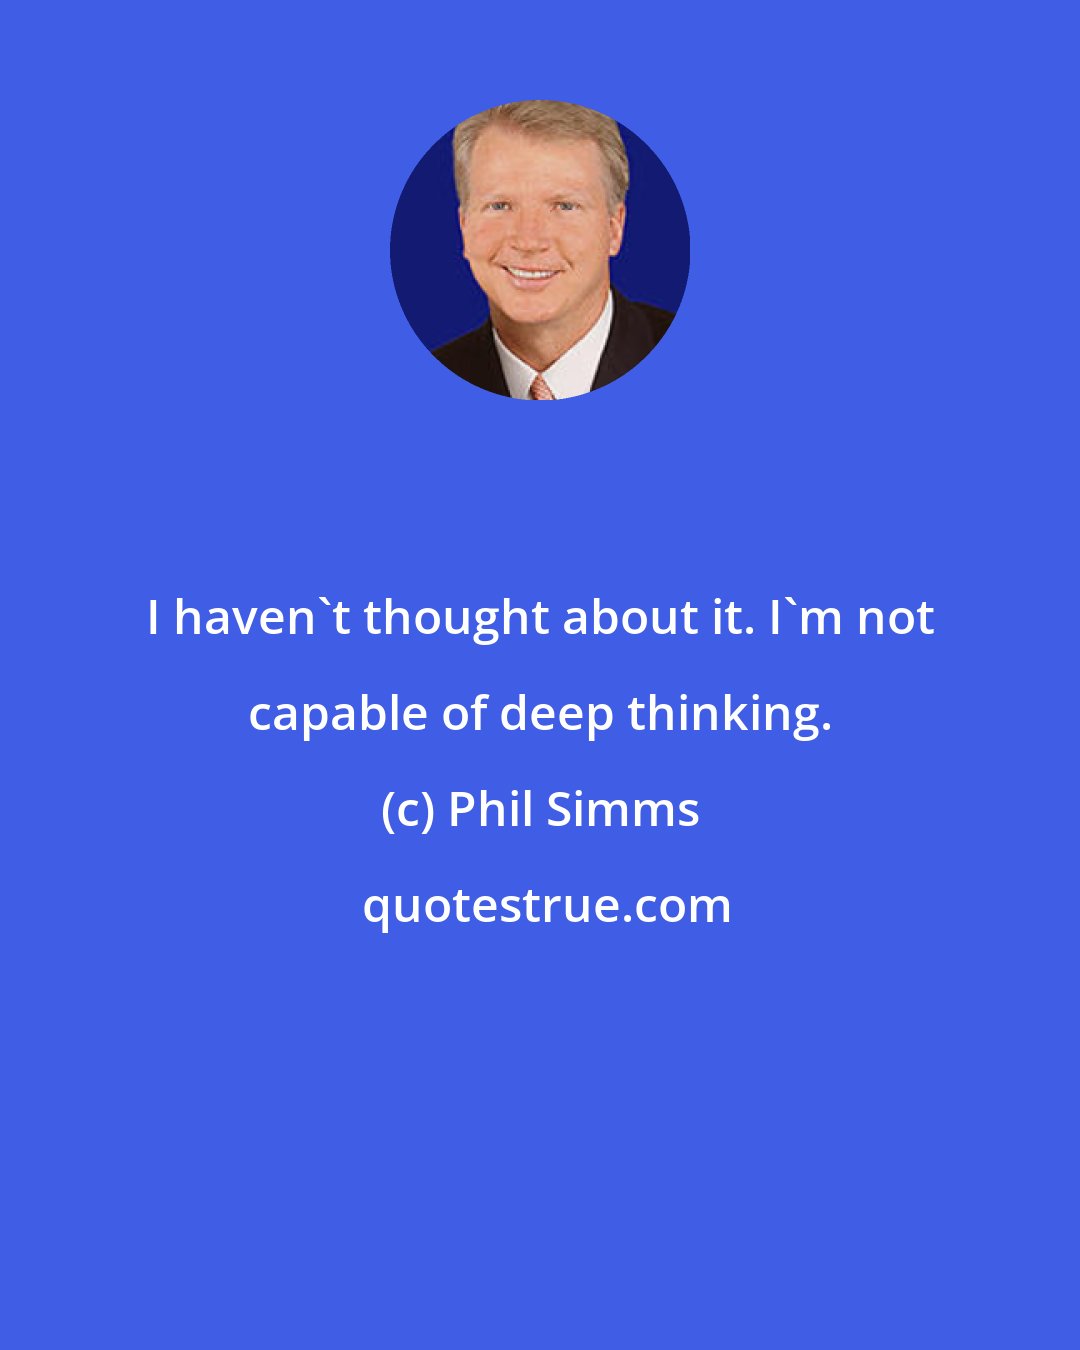 Phil Simms: I haven't thought about it. I'm not capable of deep thinking.